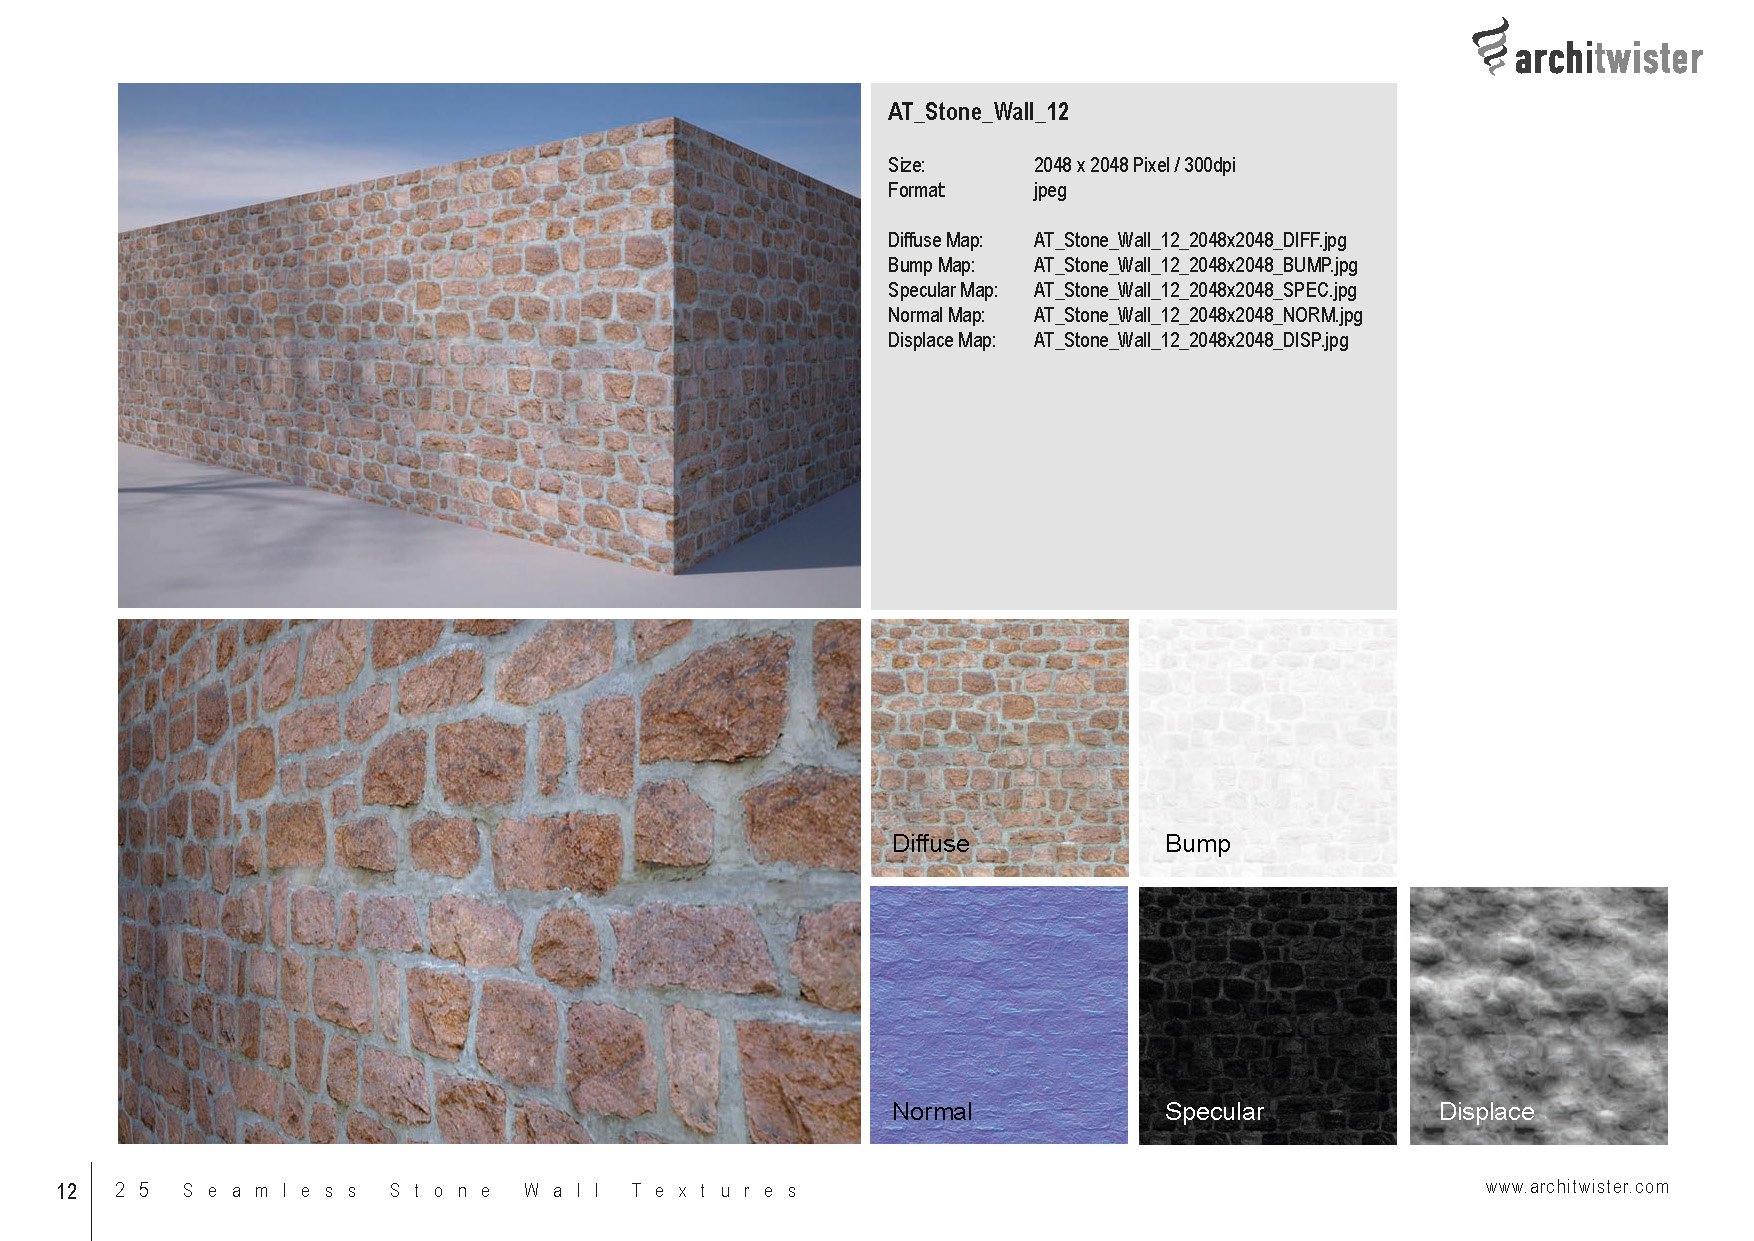 at stone wall textures catalog 01 seite 13 402